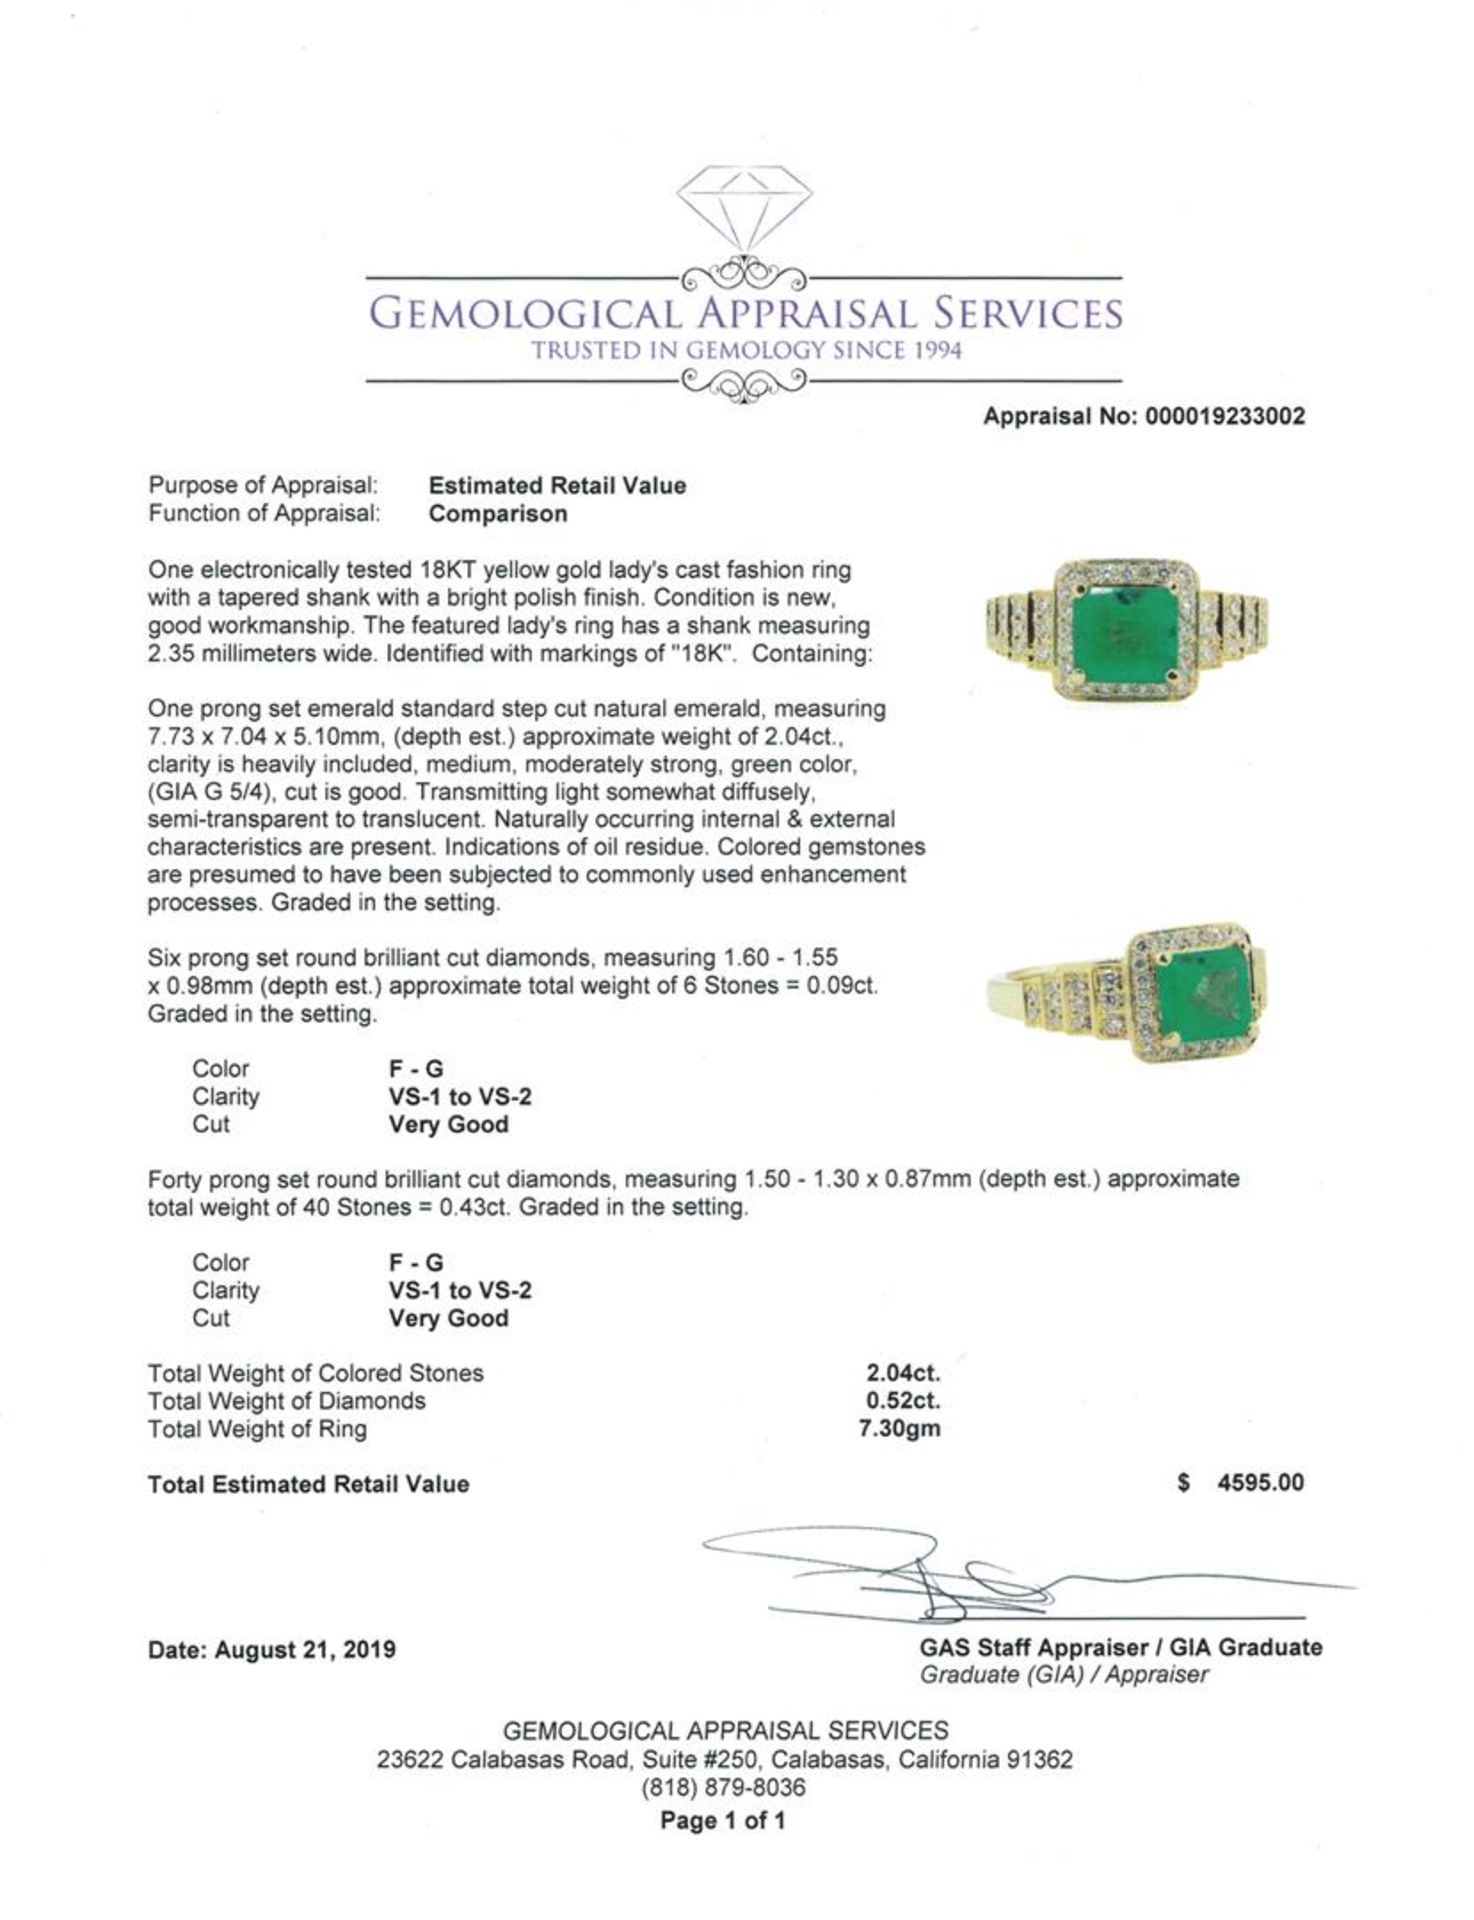 2.56 ctw Emerald and Diamond Ring - 18KT Yellow Gold - Image 5 of 5